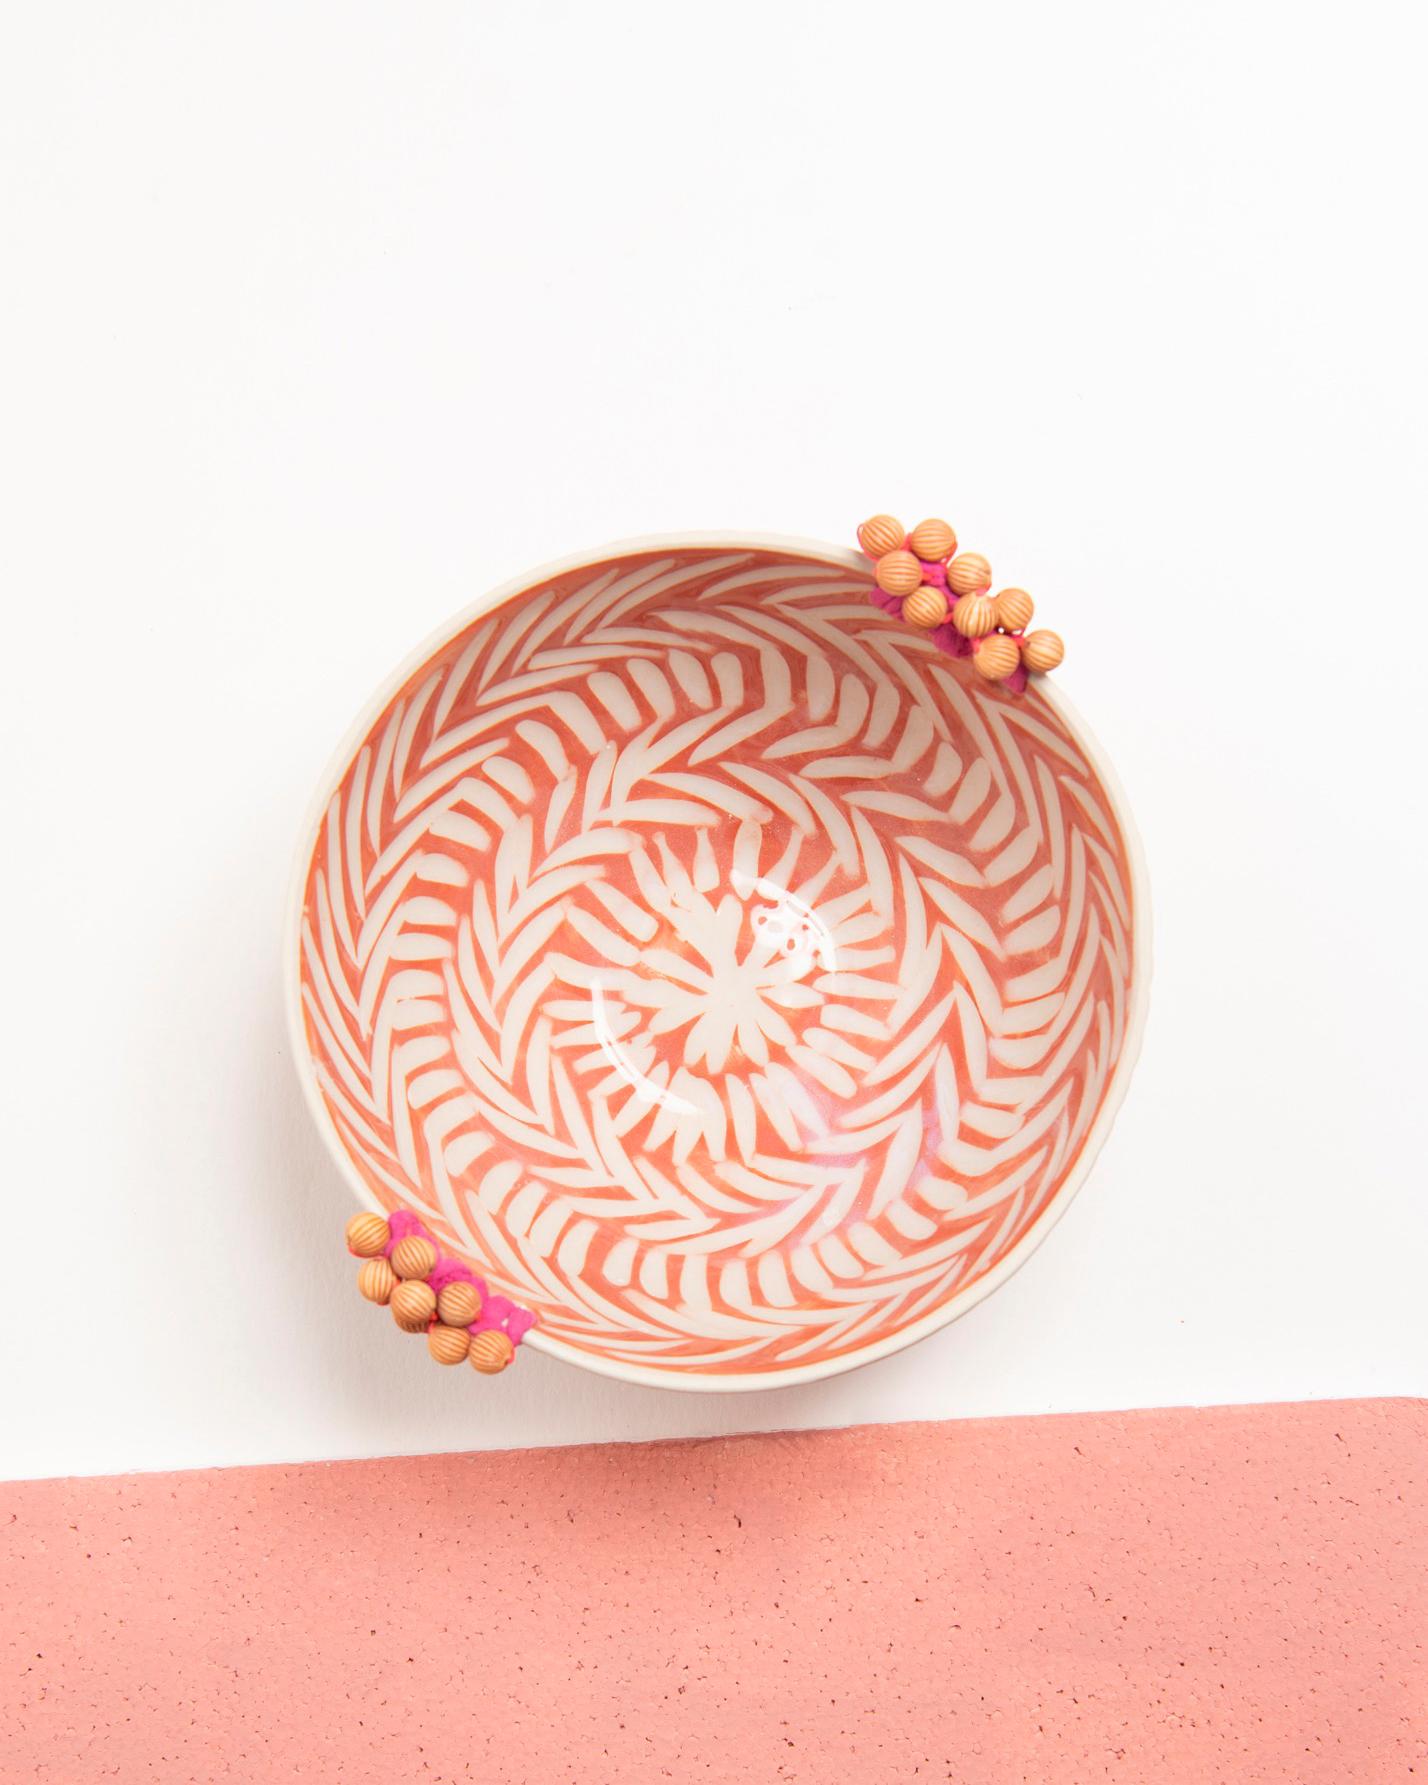 A colorful bowl for your mantle
This handcrafted ceramic bowl is rustically European with whimsical details like colorful beads and cotton thread. Its rustic pinkish orange and white tones bring a touch of charm to home decor, whether placed atop a